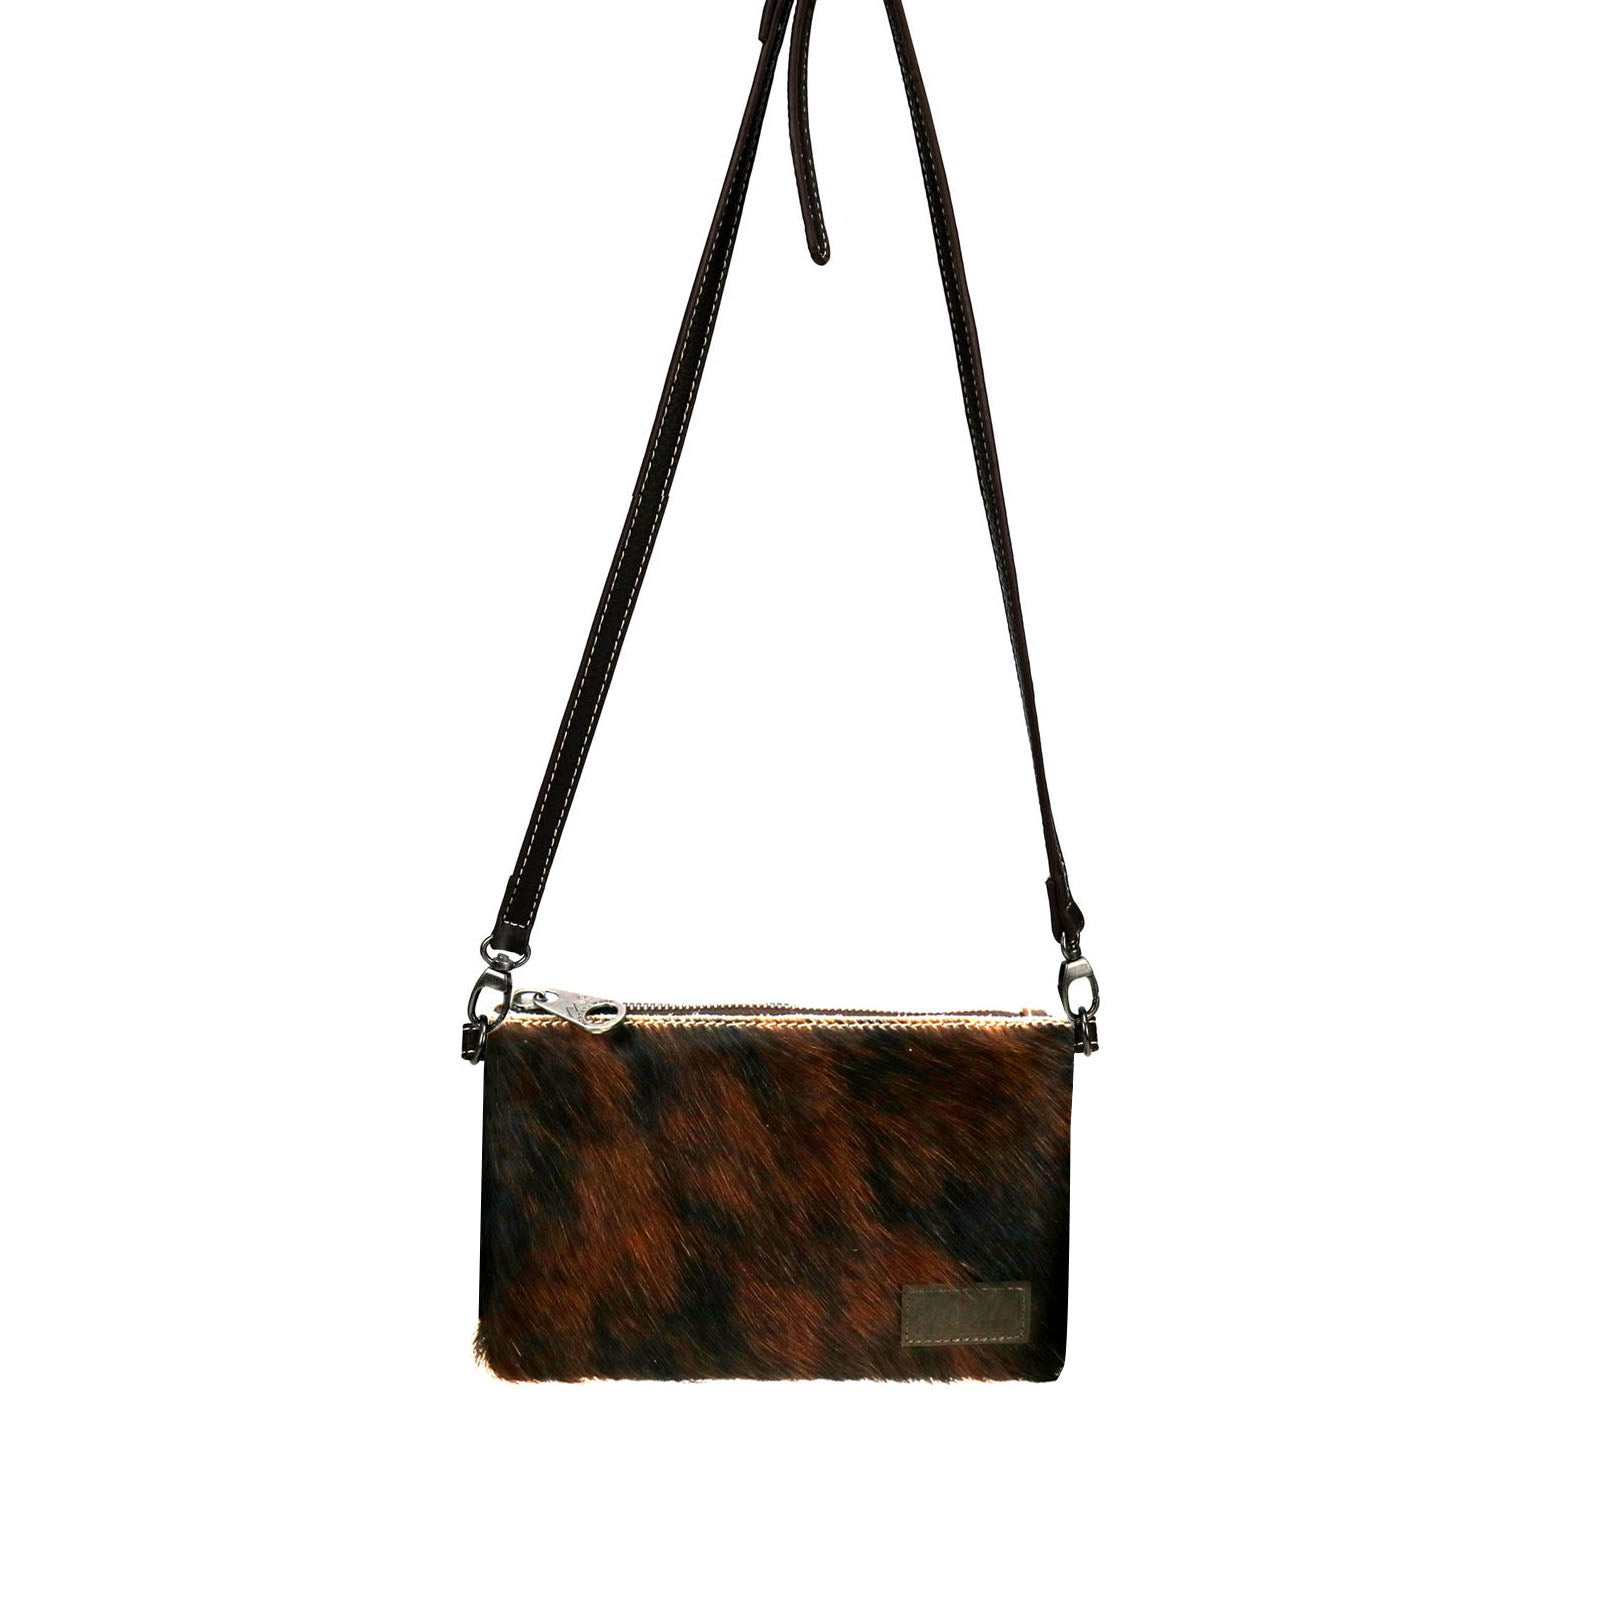 Lacey Southwestern Style CROSSBODY PURSE Bag with Genuine Cowhide